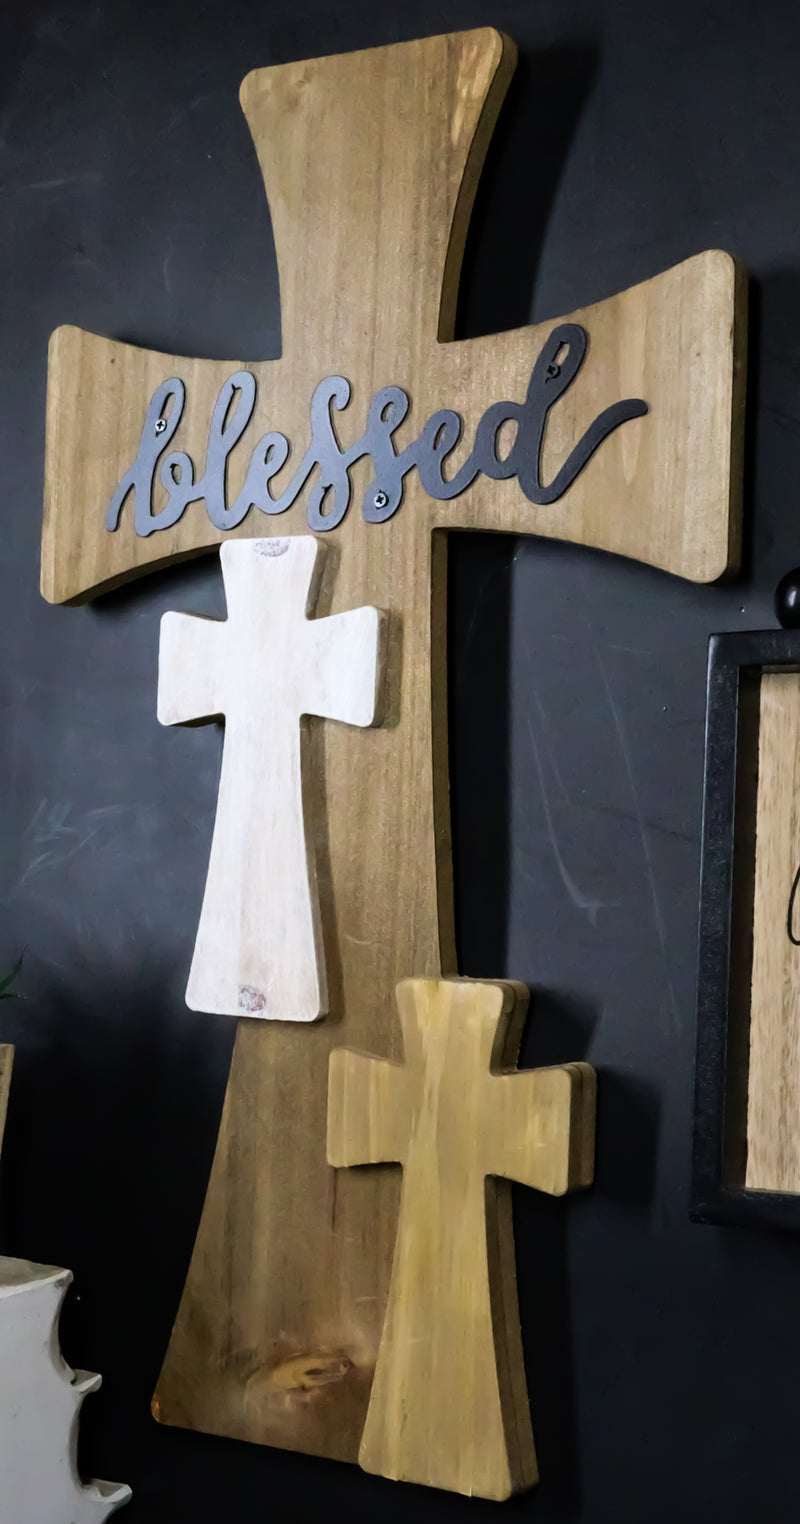 Rustic Western Wooden Blessed 3 Layered Multi Colored Wall Cross Decor Plaque